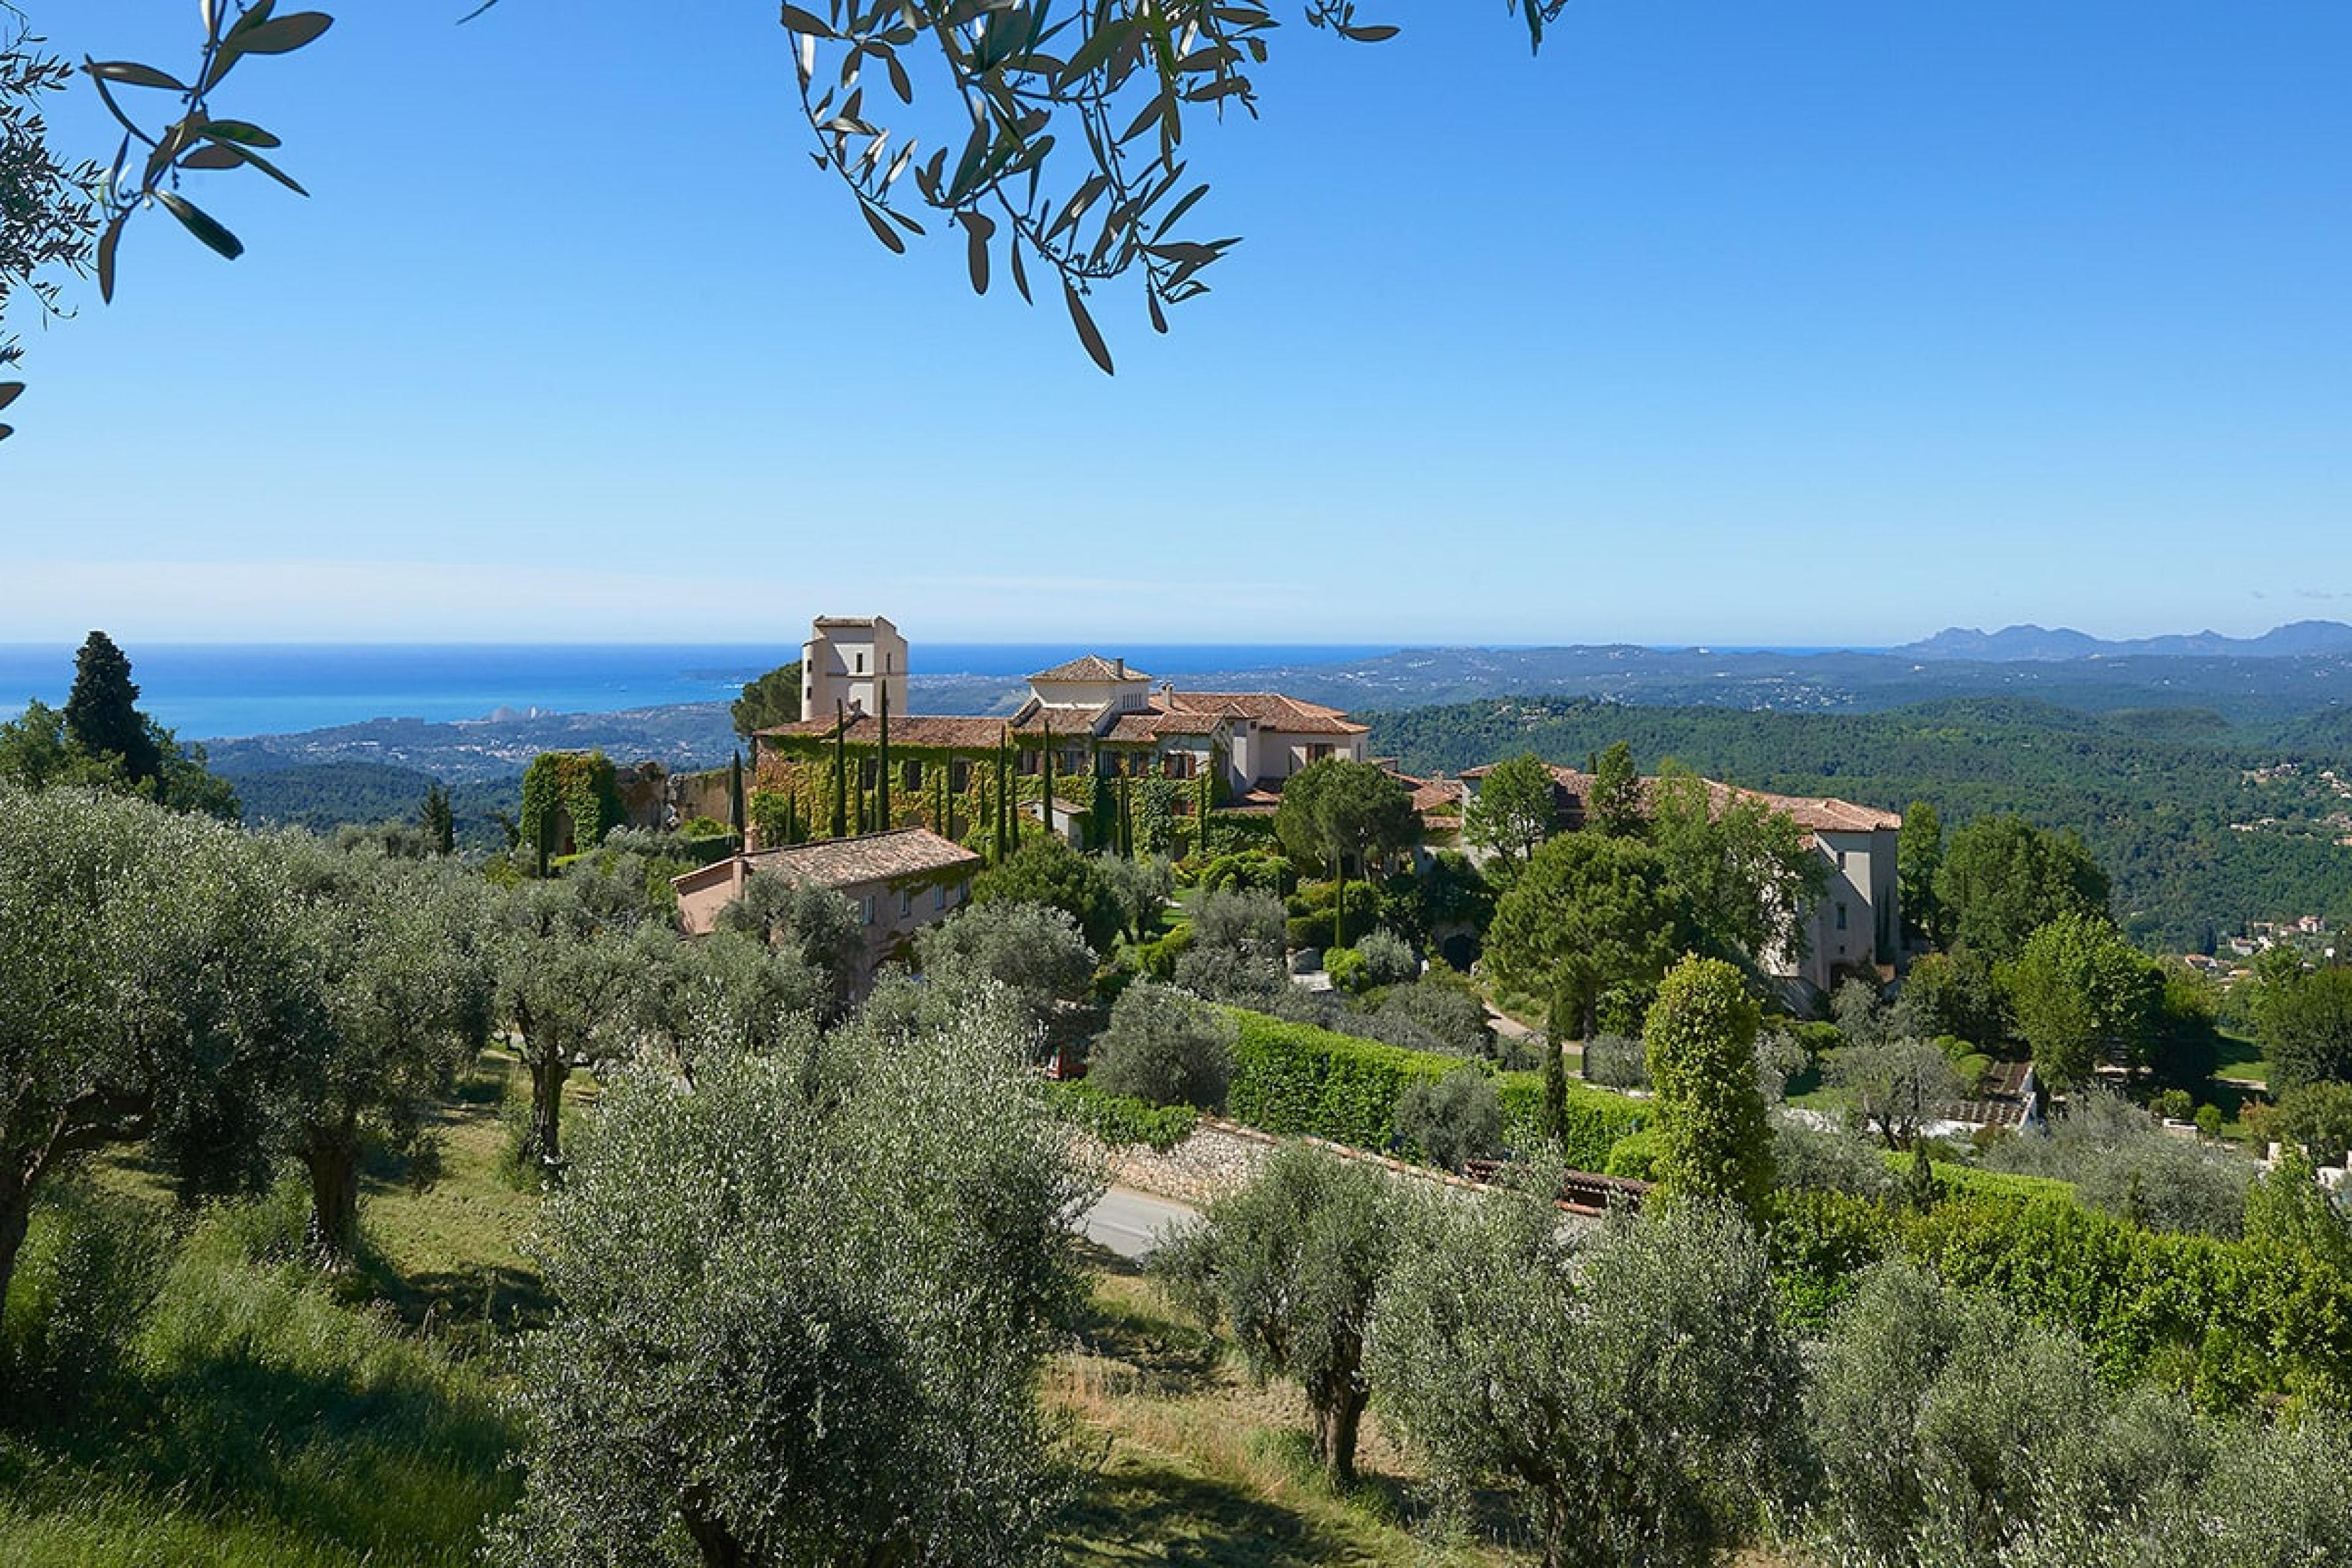 view of chateau building peeking through olive groves on hill overlooking south of france and mediterranean